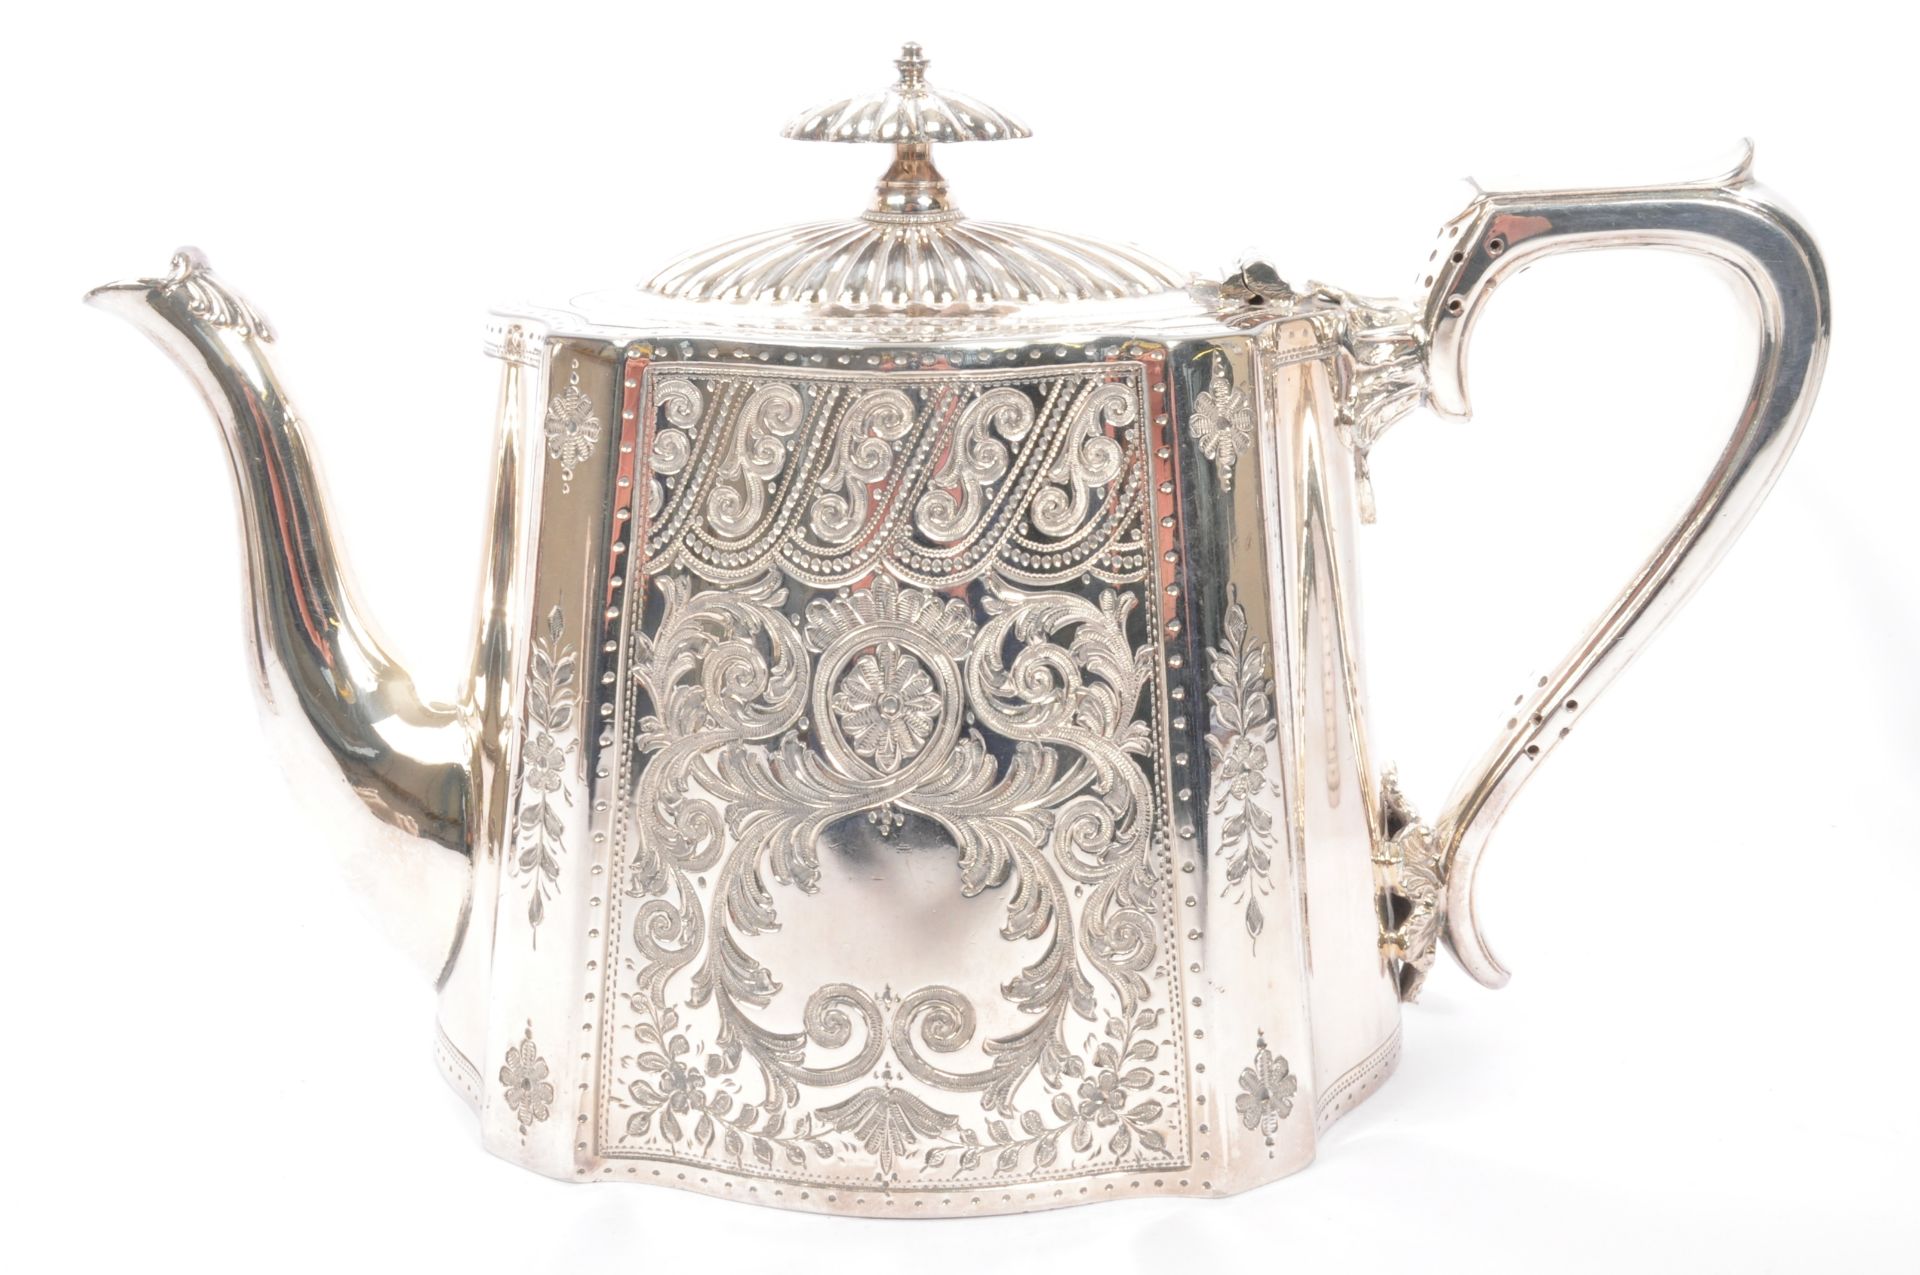 EARLY 20TH CENTURY WALKER & HALL, SHEFFIELD SILVER PLATED ITEMS - Image 2 of 7